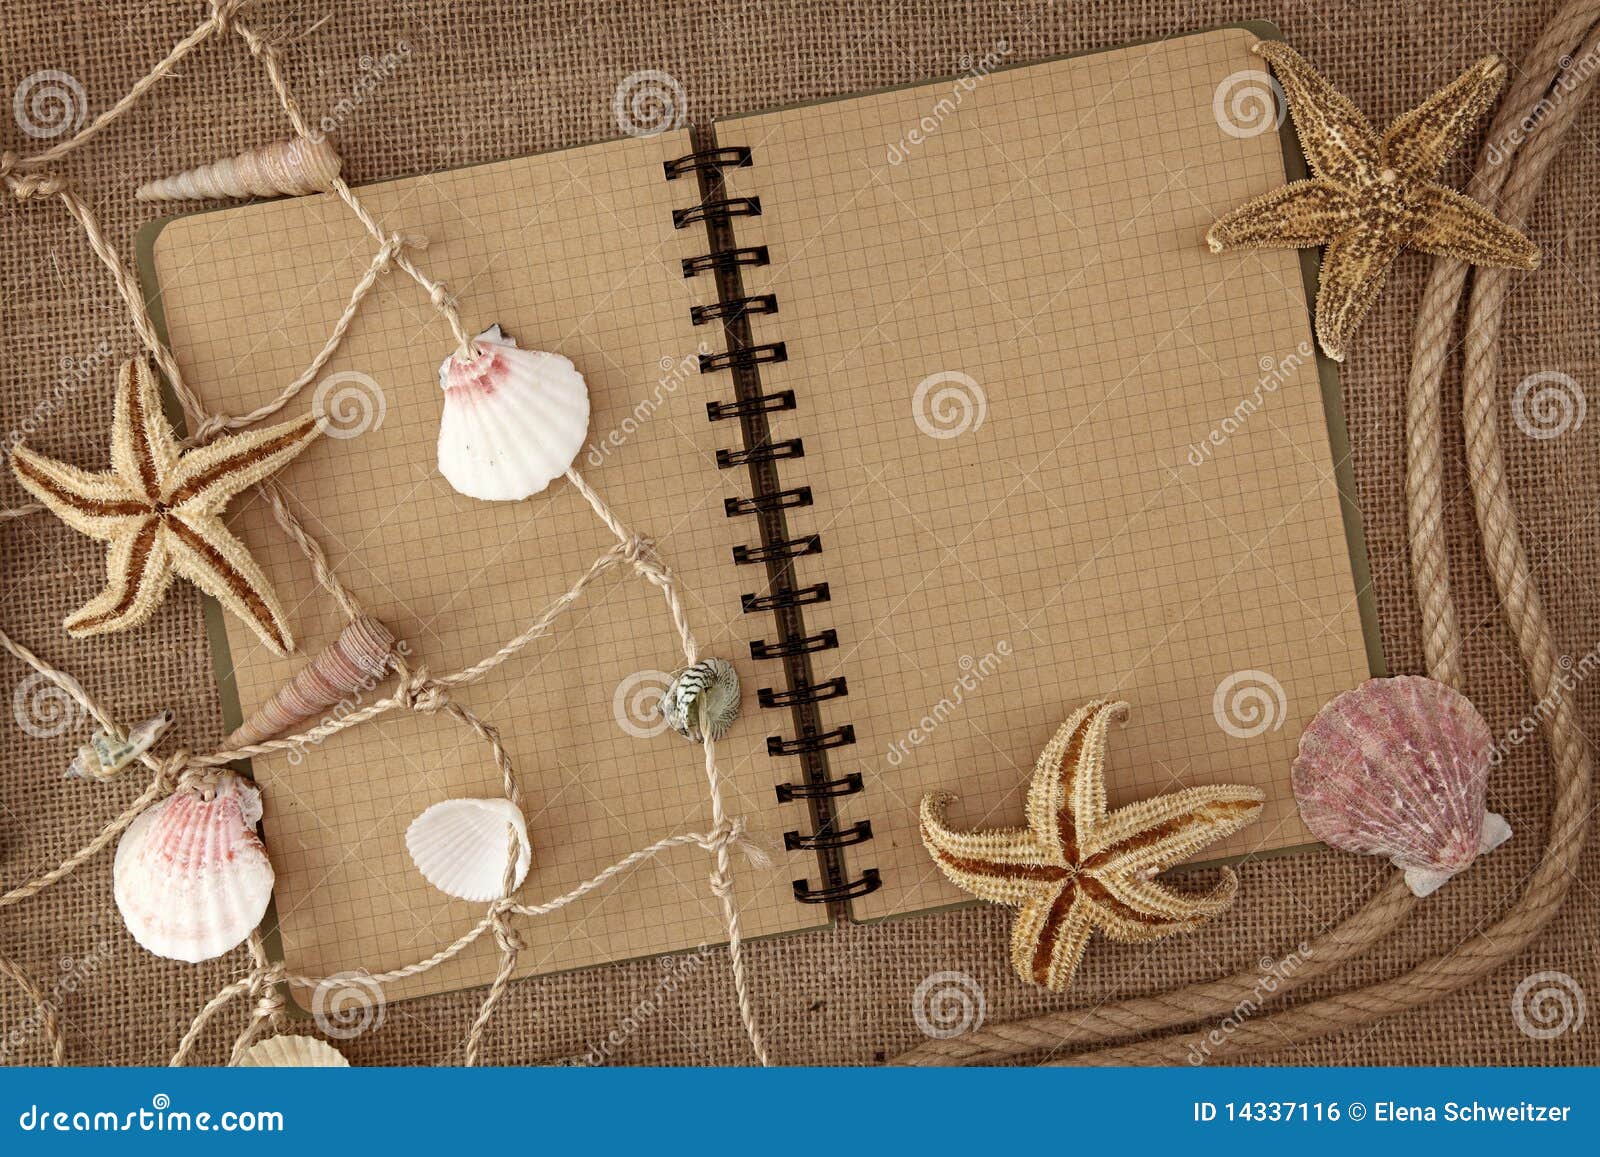 Fishing Net and Exercise Book Stock Photo - Image of note, blank: 14337116